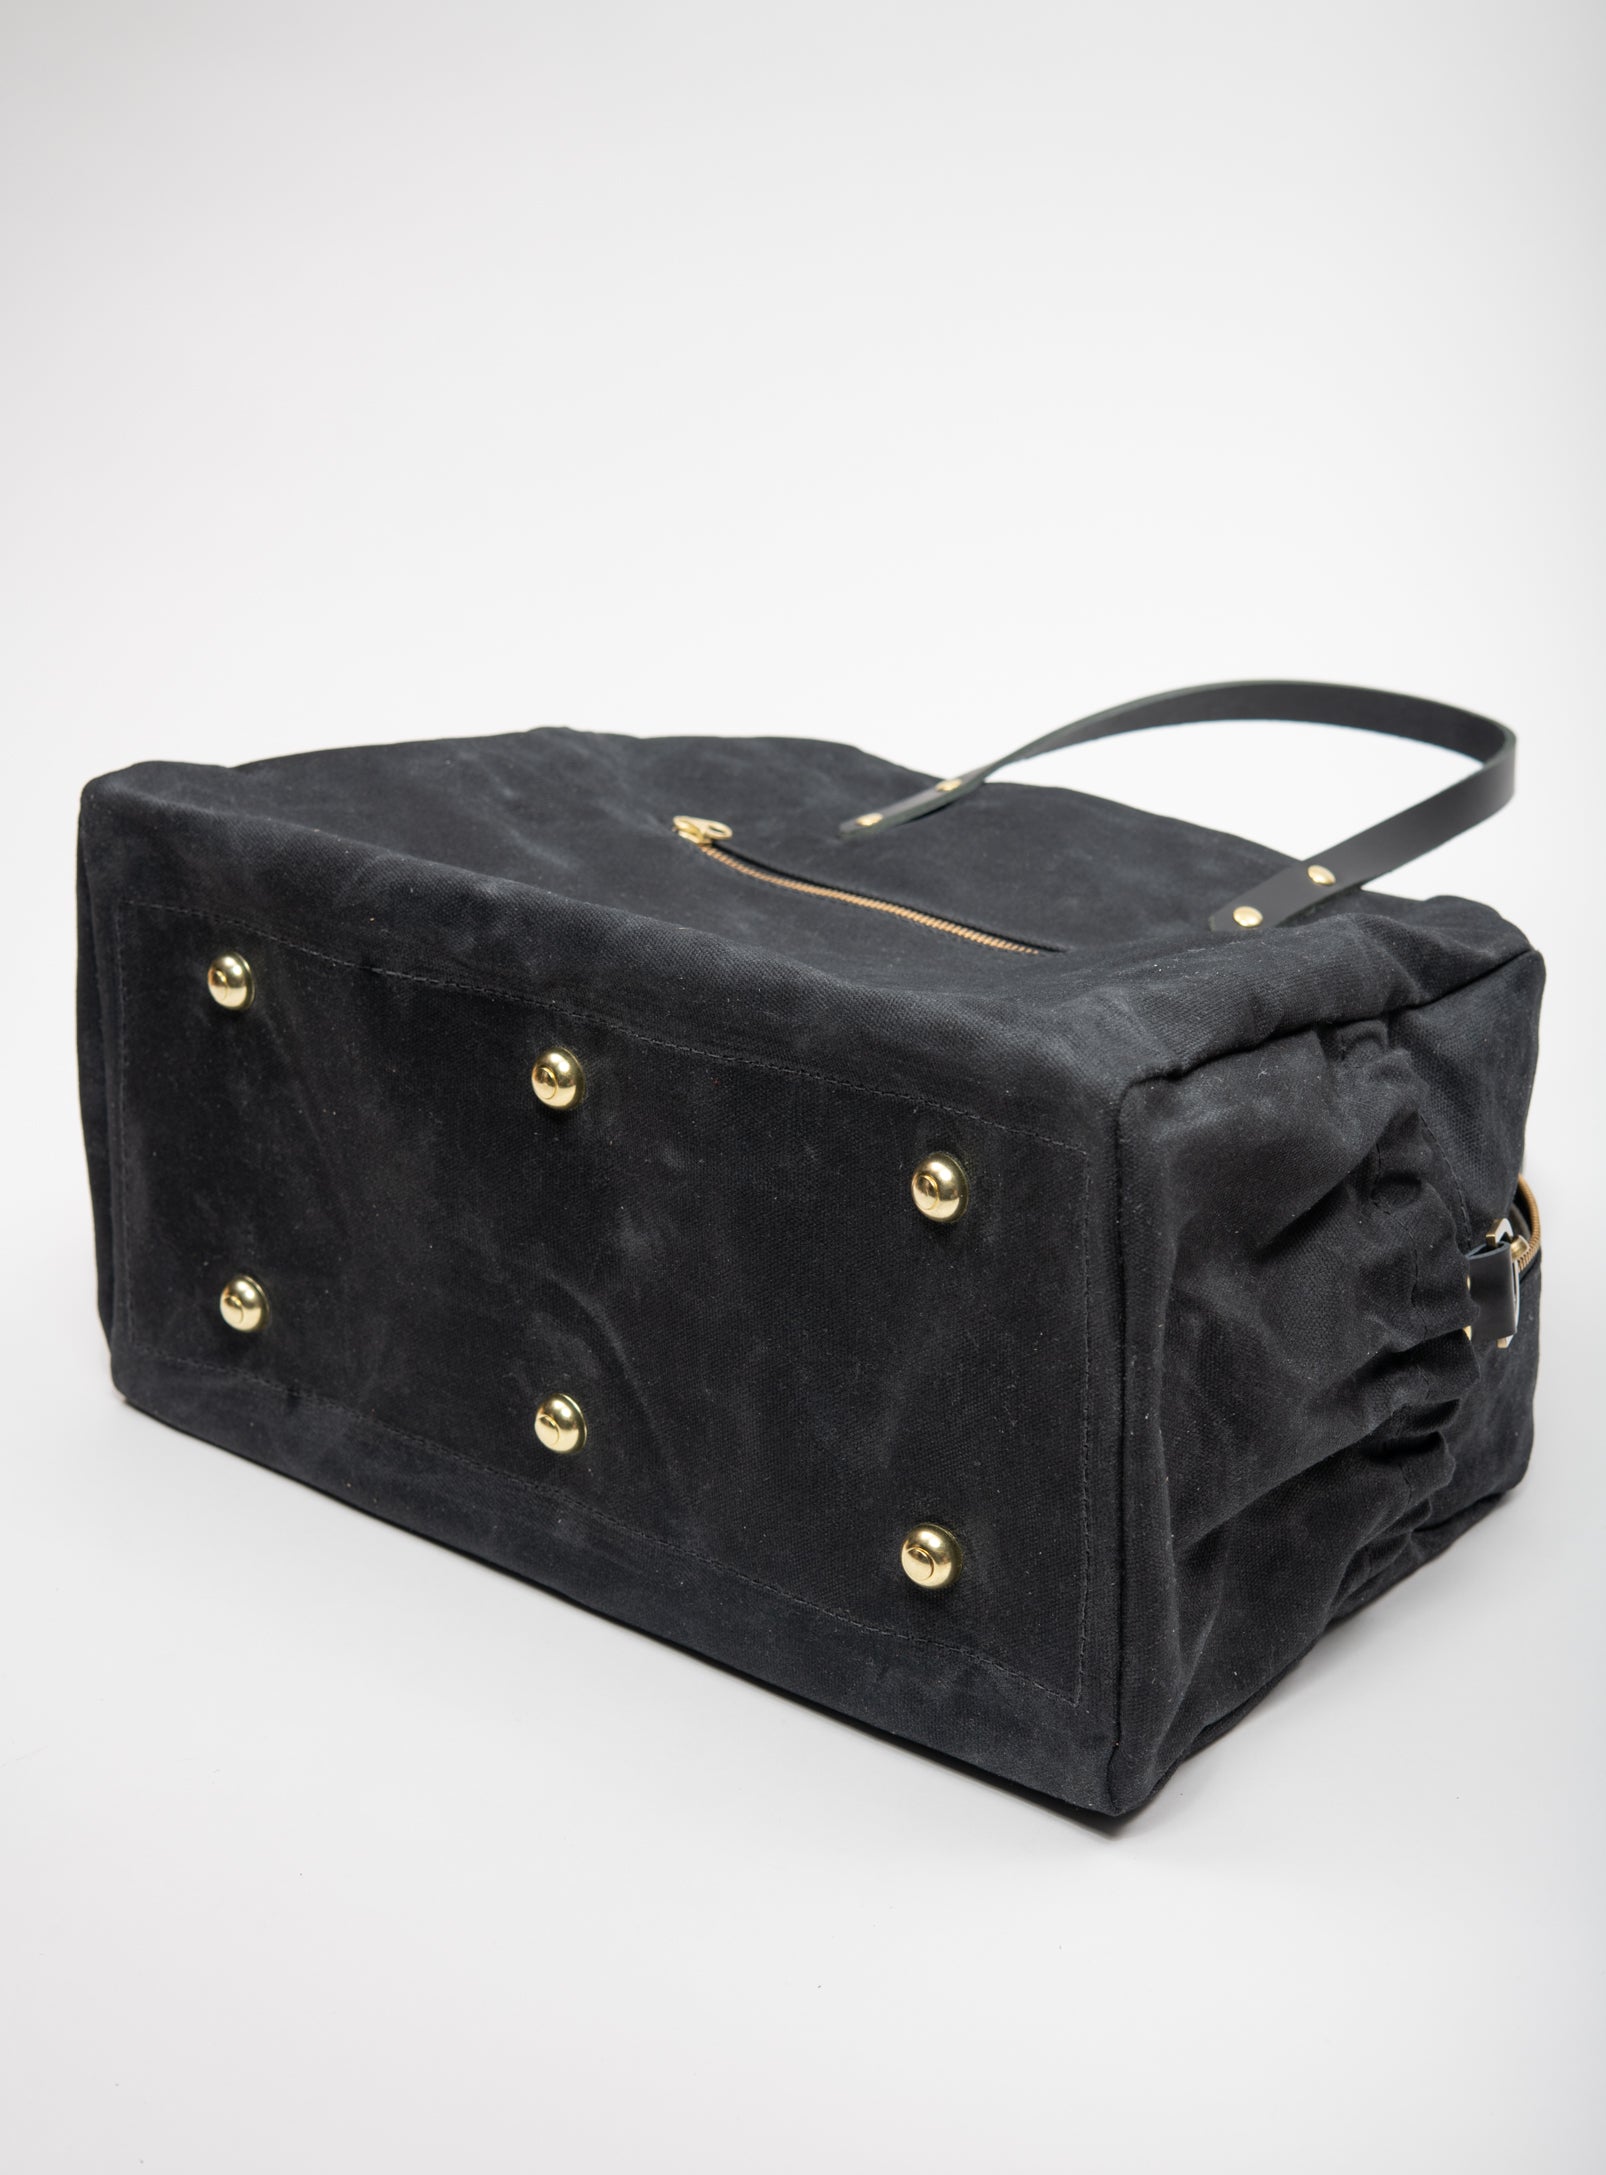 Veinage Leather and canvas travel or maternity bag multifunctional CIAO made to order, handmade in Montreal Canada